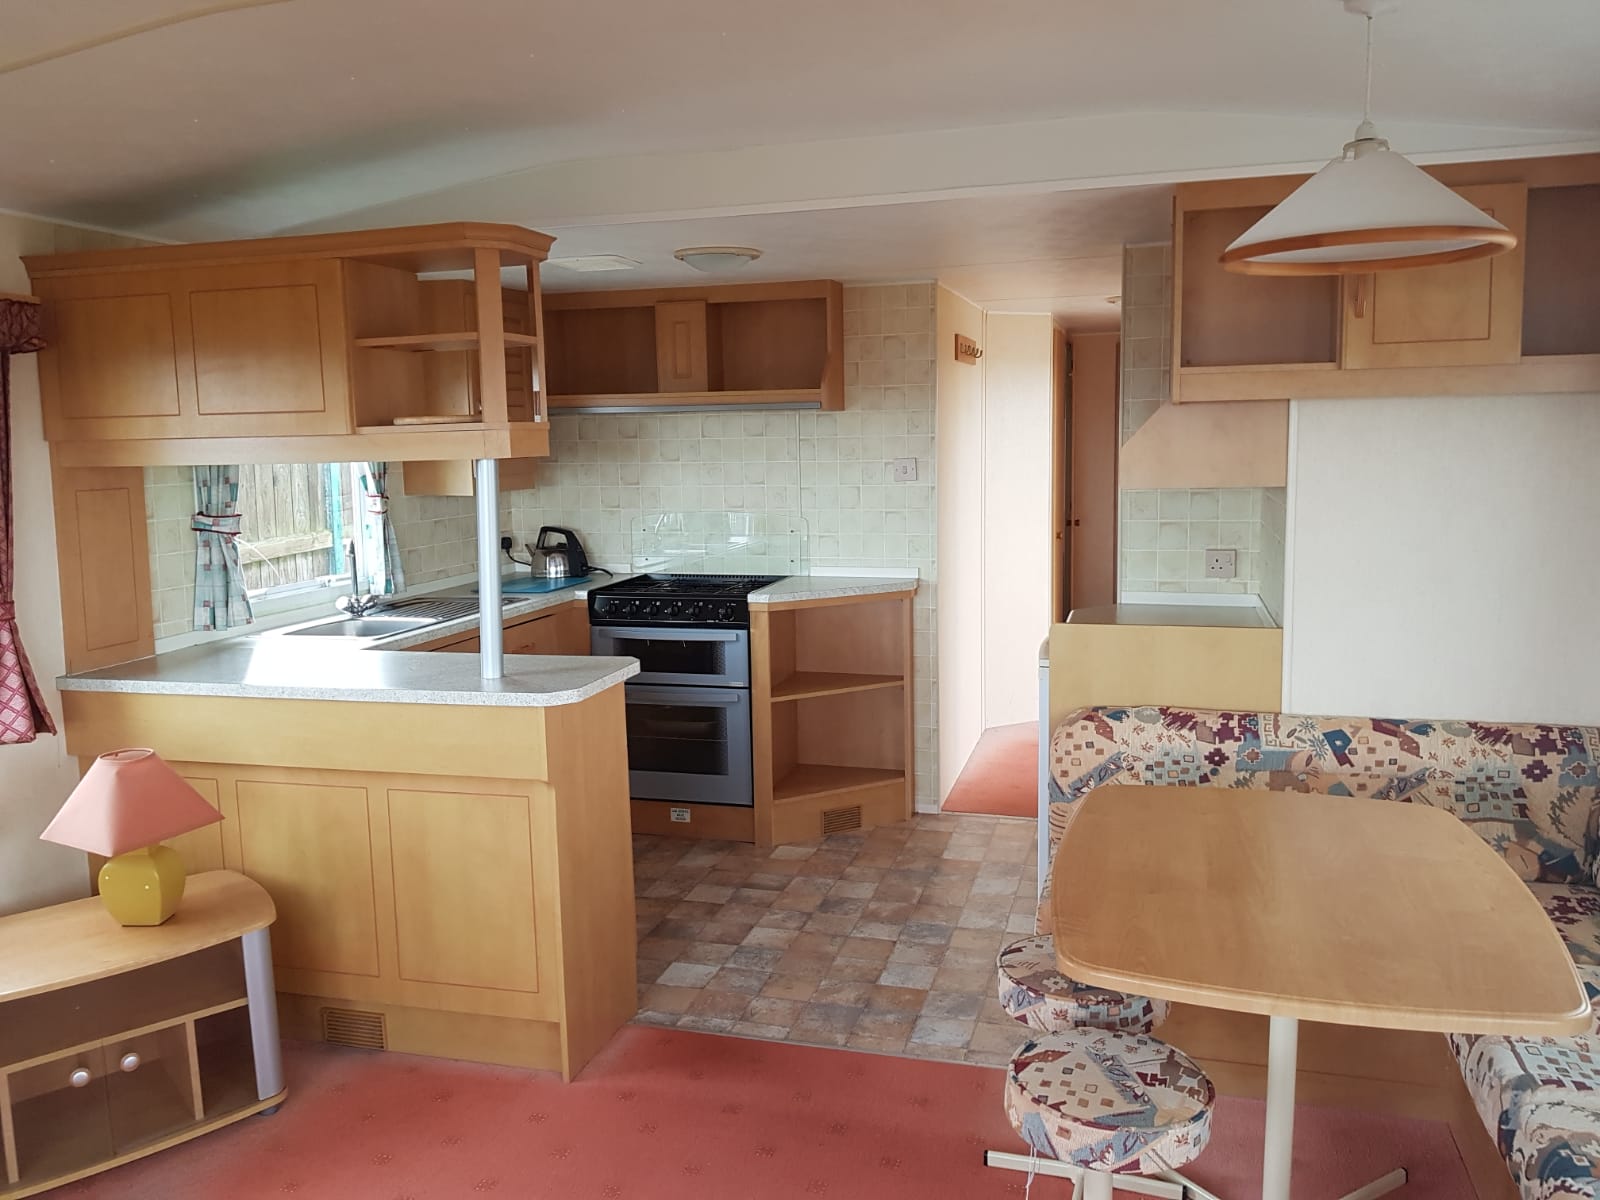 Magnificent mobile home kitchen